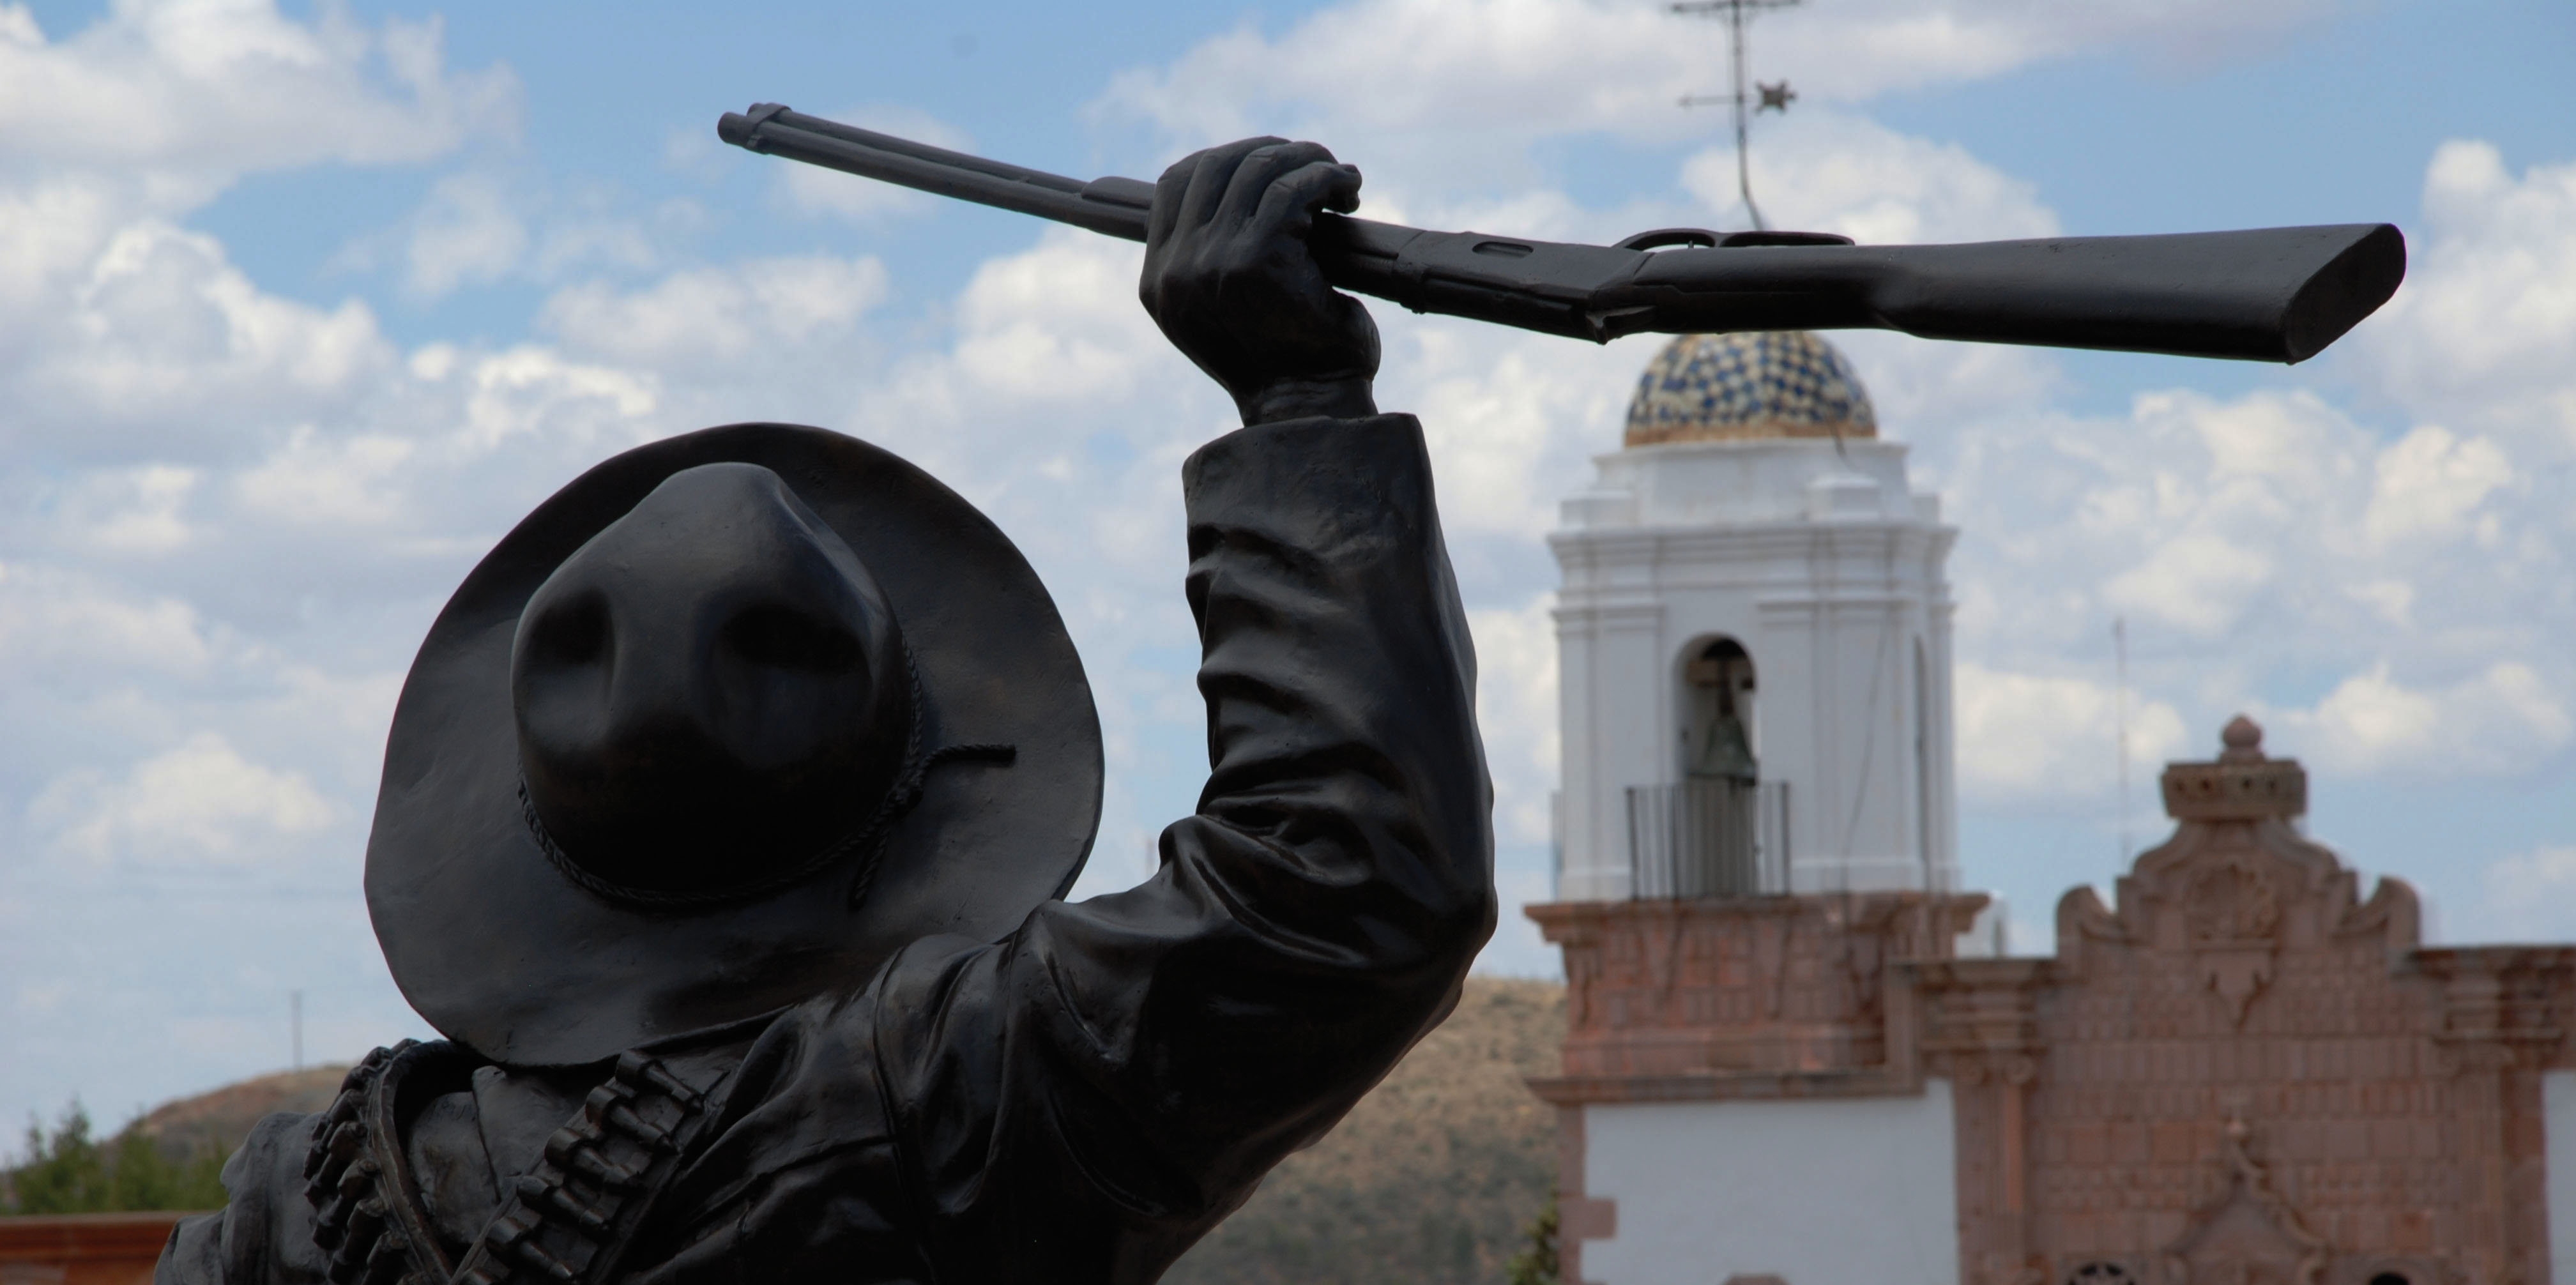 A view from behind a statue of Pancho Villa in Zacatecas, Mexico, showing him in a sombrero with a rifle in his upraised hand. (Photo courtesy of the Zacatecas Ministry of Tourism.)